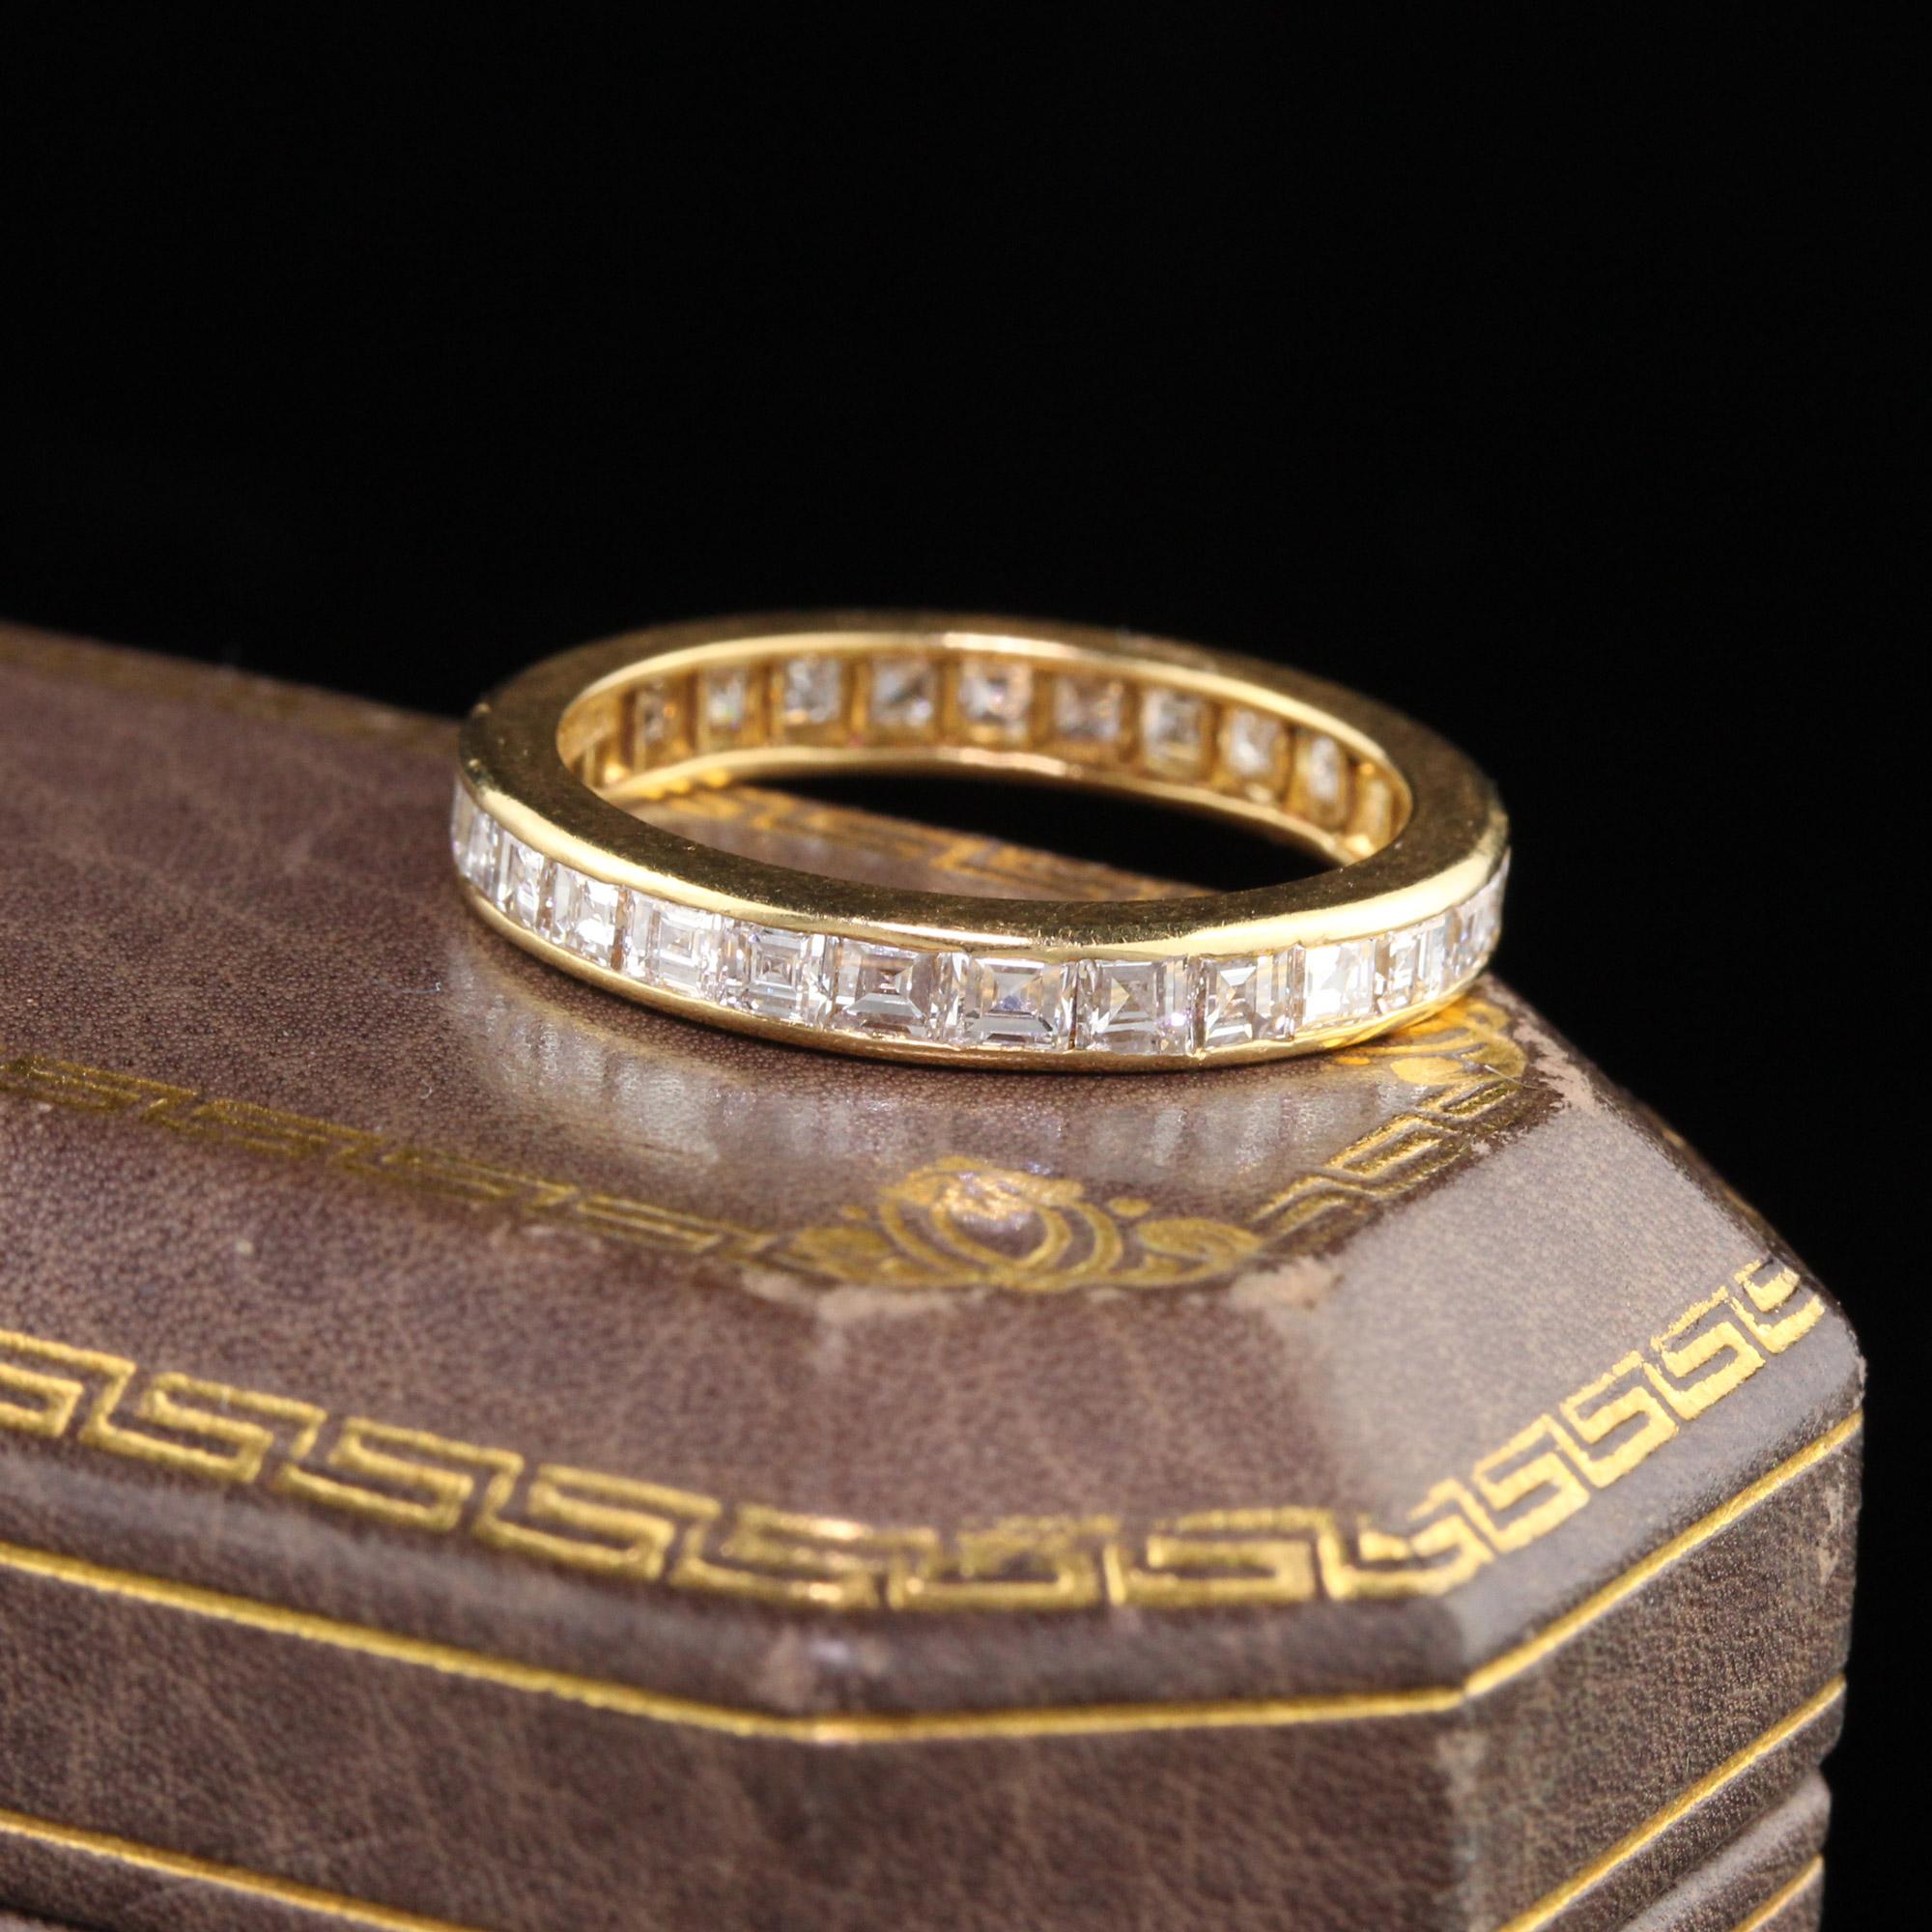 Stunning Vintage Tiffany & Co eternity band in yellow gold with carre cut diamonds going all the way around. In excellent condition.

#R0396

Metal: 18K Yellow Gold 

Weight: 2.4 Grams

Total Diamond Weight: Approximately 1.50 cts carre cut